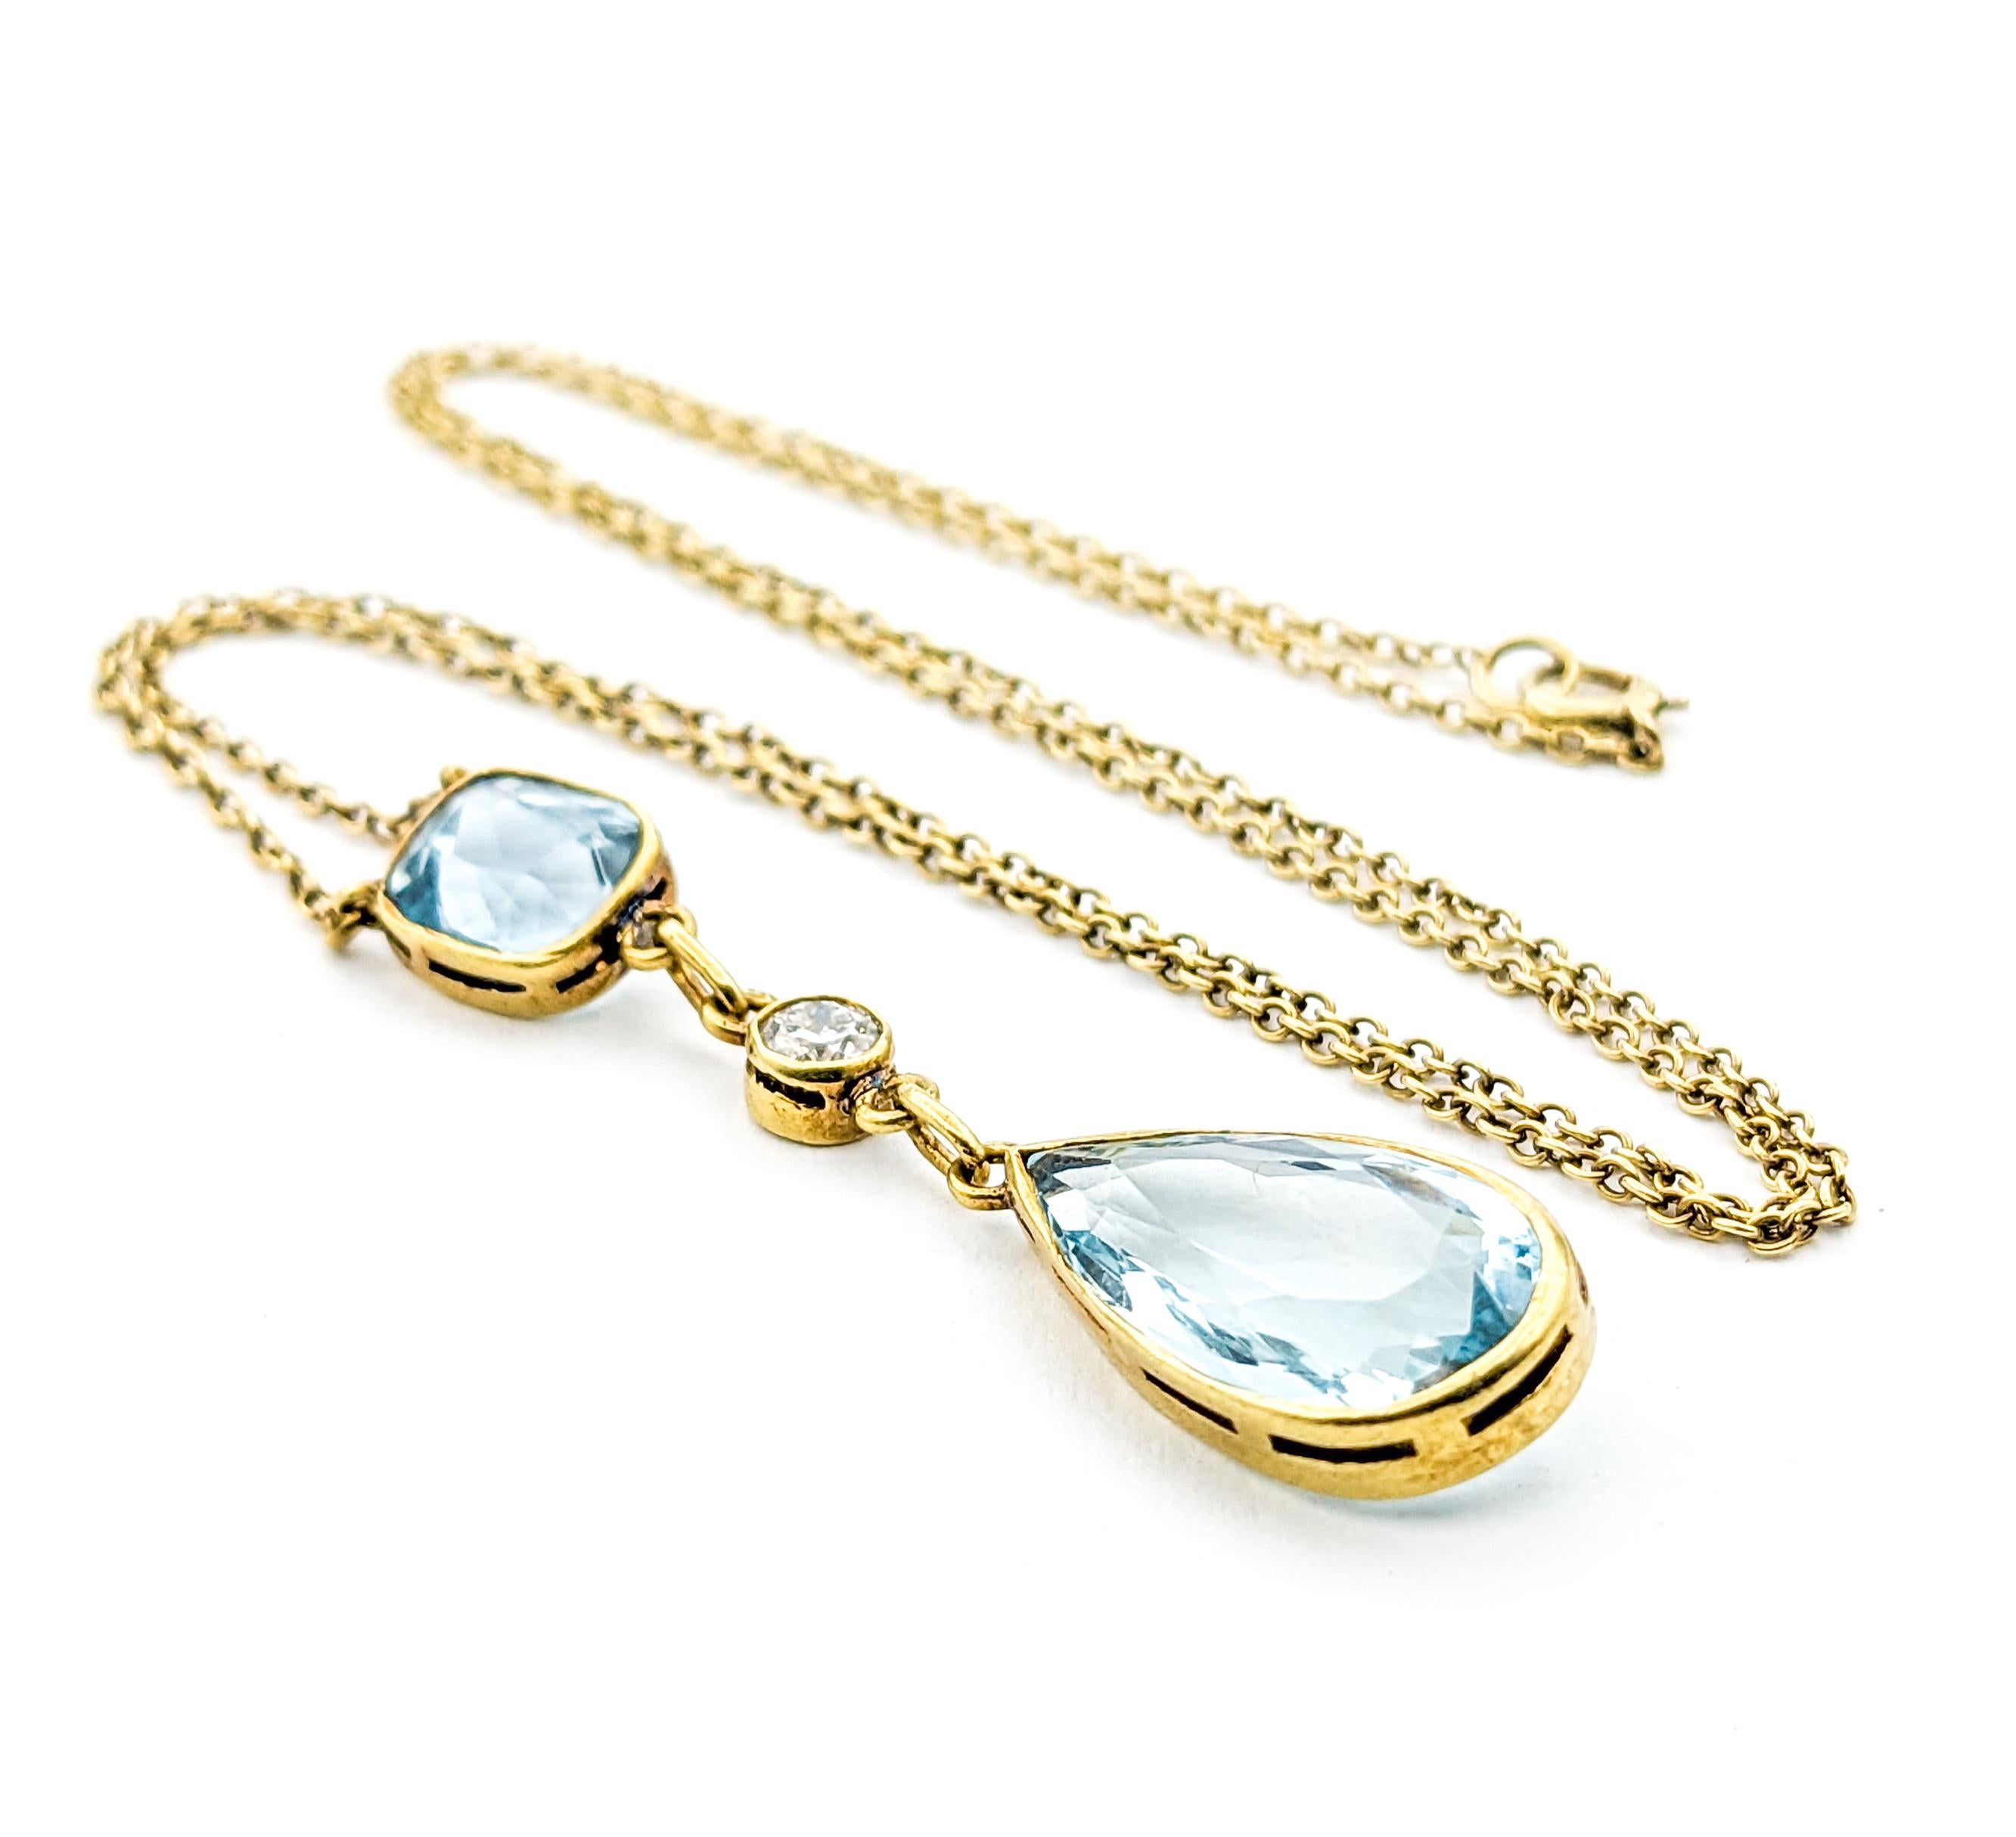 Diamond Vintage Mid Century Necklace in Yellow Gold

Introducing an exquisite Vintage Mid Century Necklace, beautifully crafted in 14kt yellow gold. This remarkable chain is adorned with a .18ct Old European Diamond, complemented by a Vintage Mid